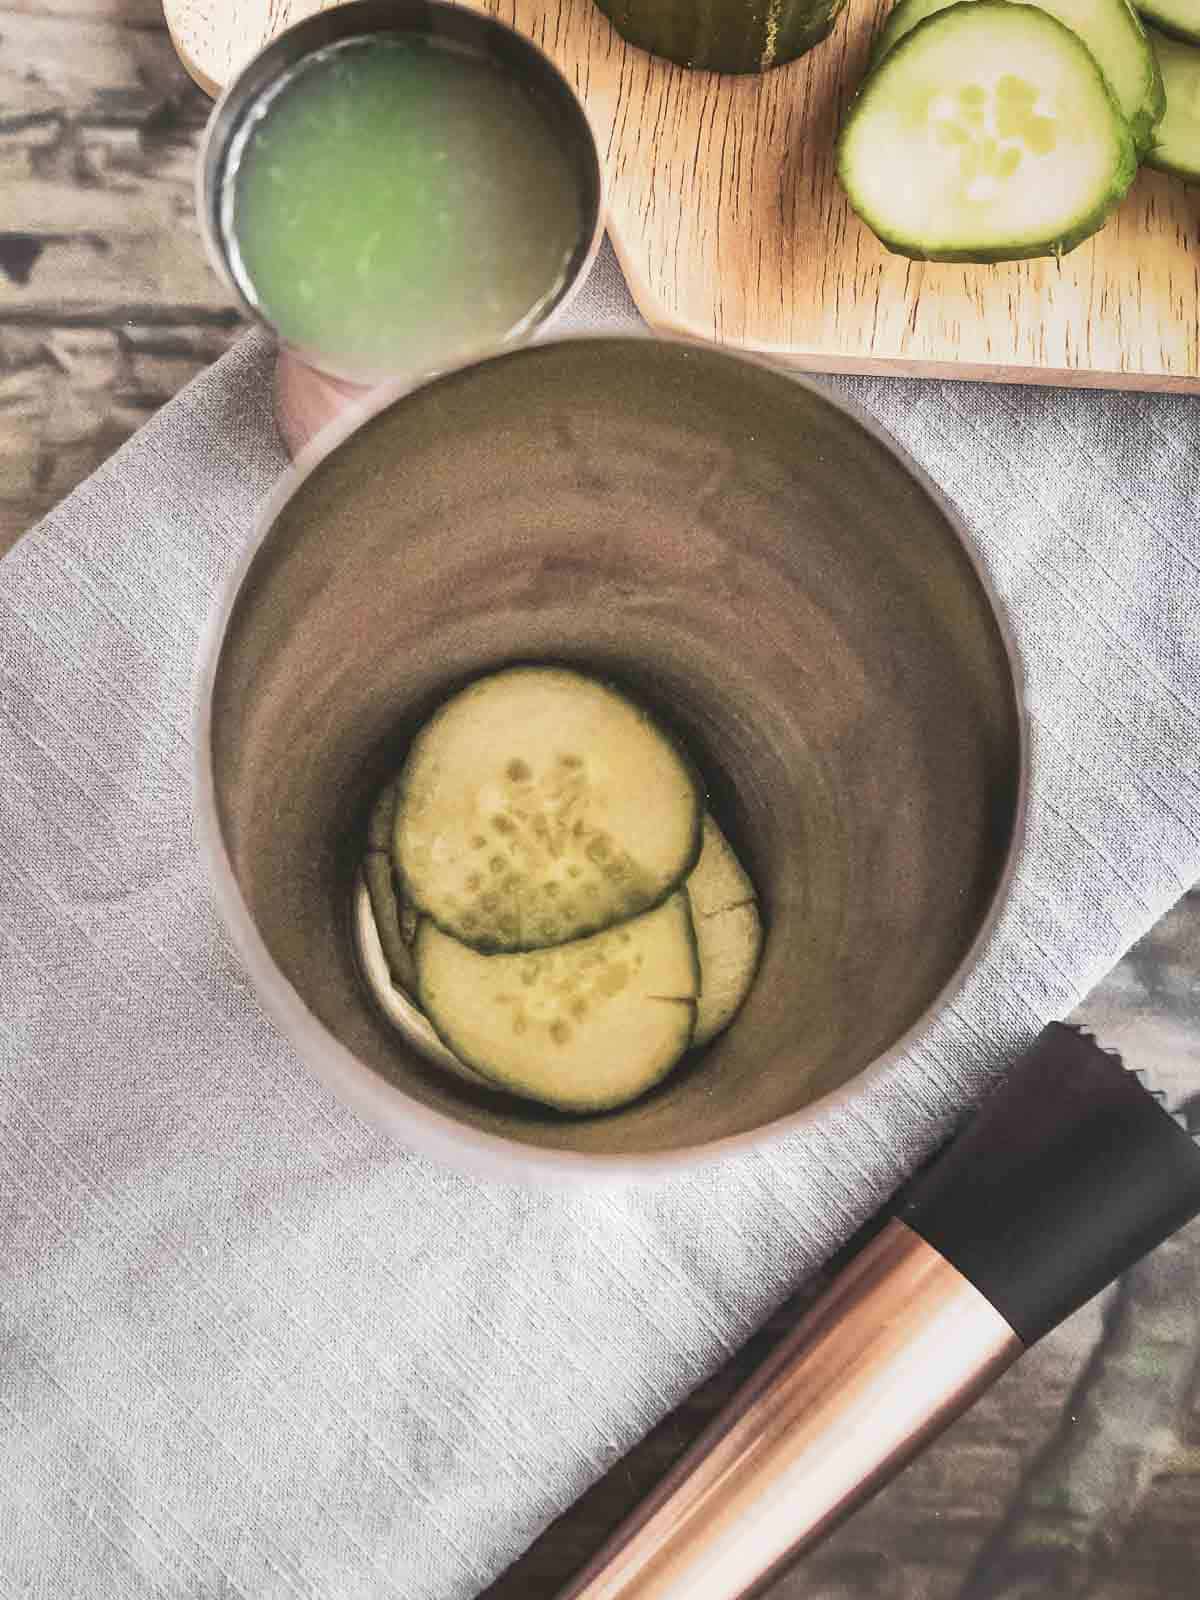 5-6 sliced cucumbers in the cocktail shaker